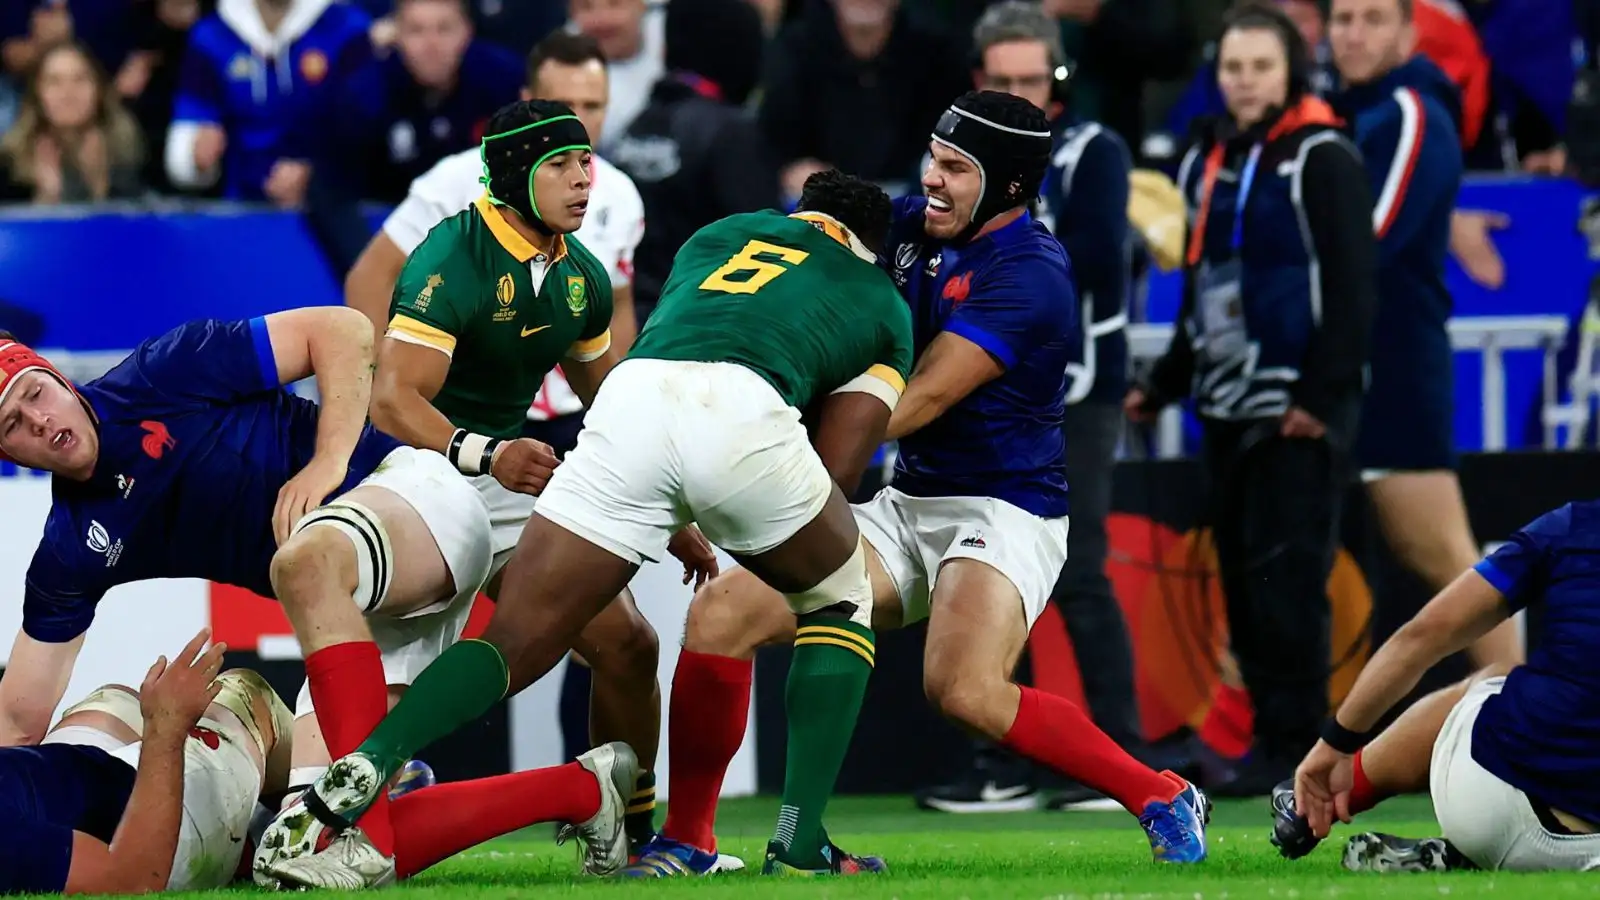 France's Antoine Dupont challenges for the ball with Springboks' captain Siya Kolisi during the Rugby World Cup quarterfinal match between France and South Africa at the Stade de France.